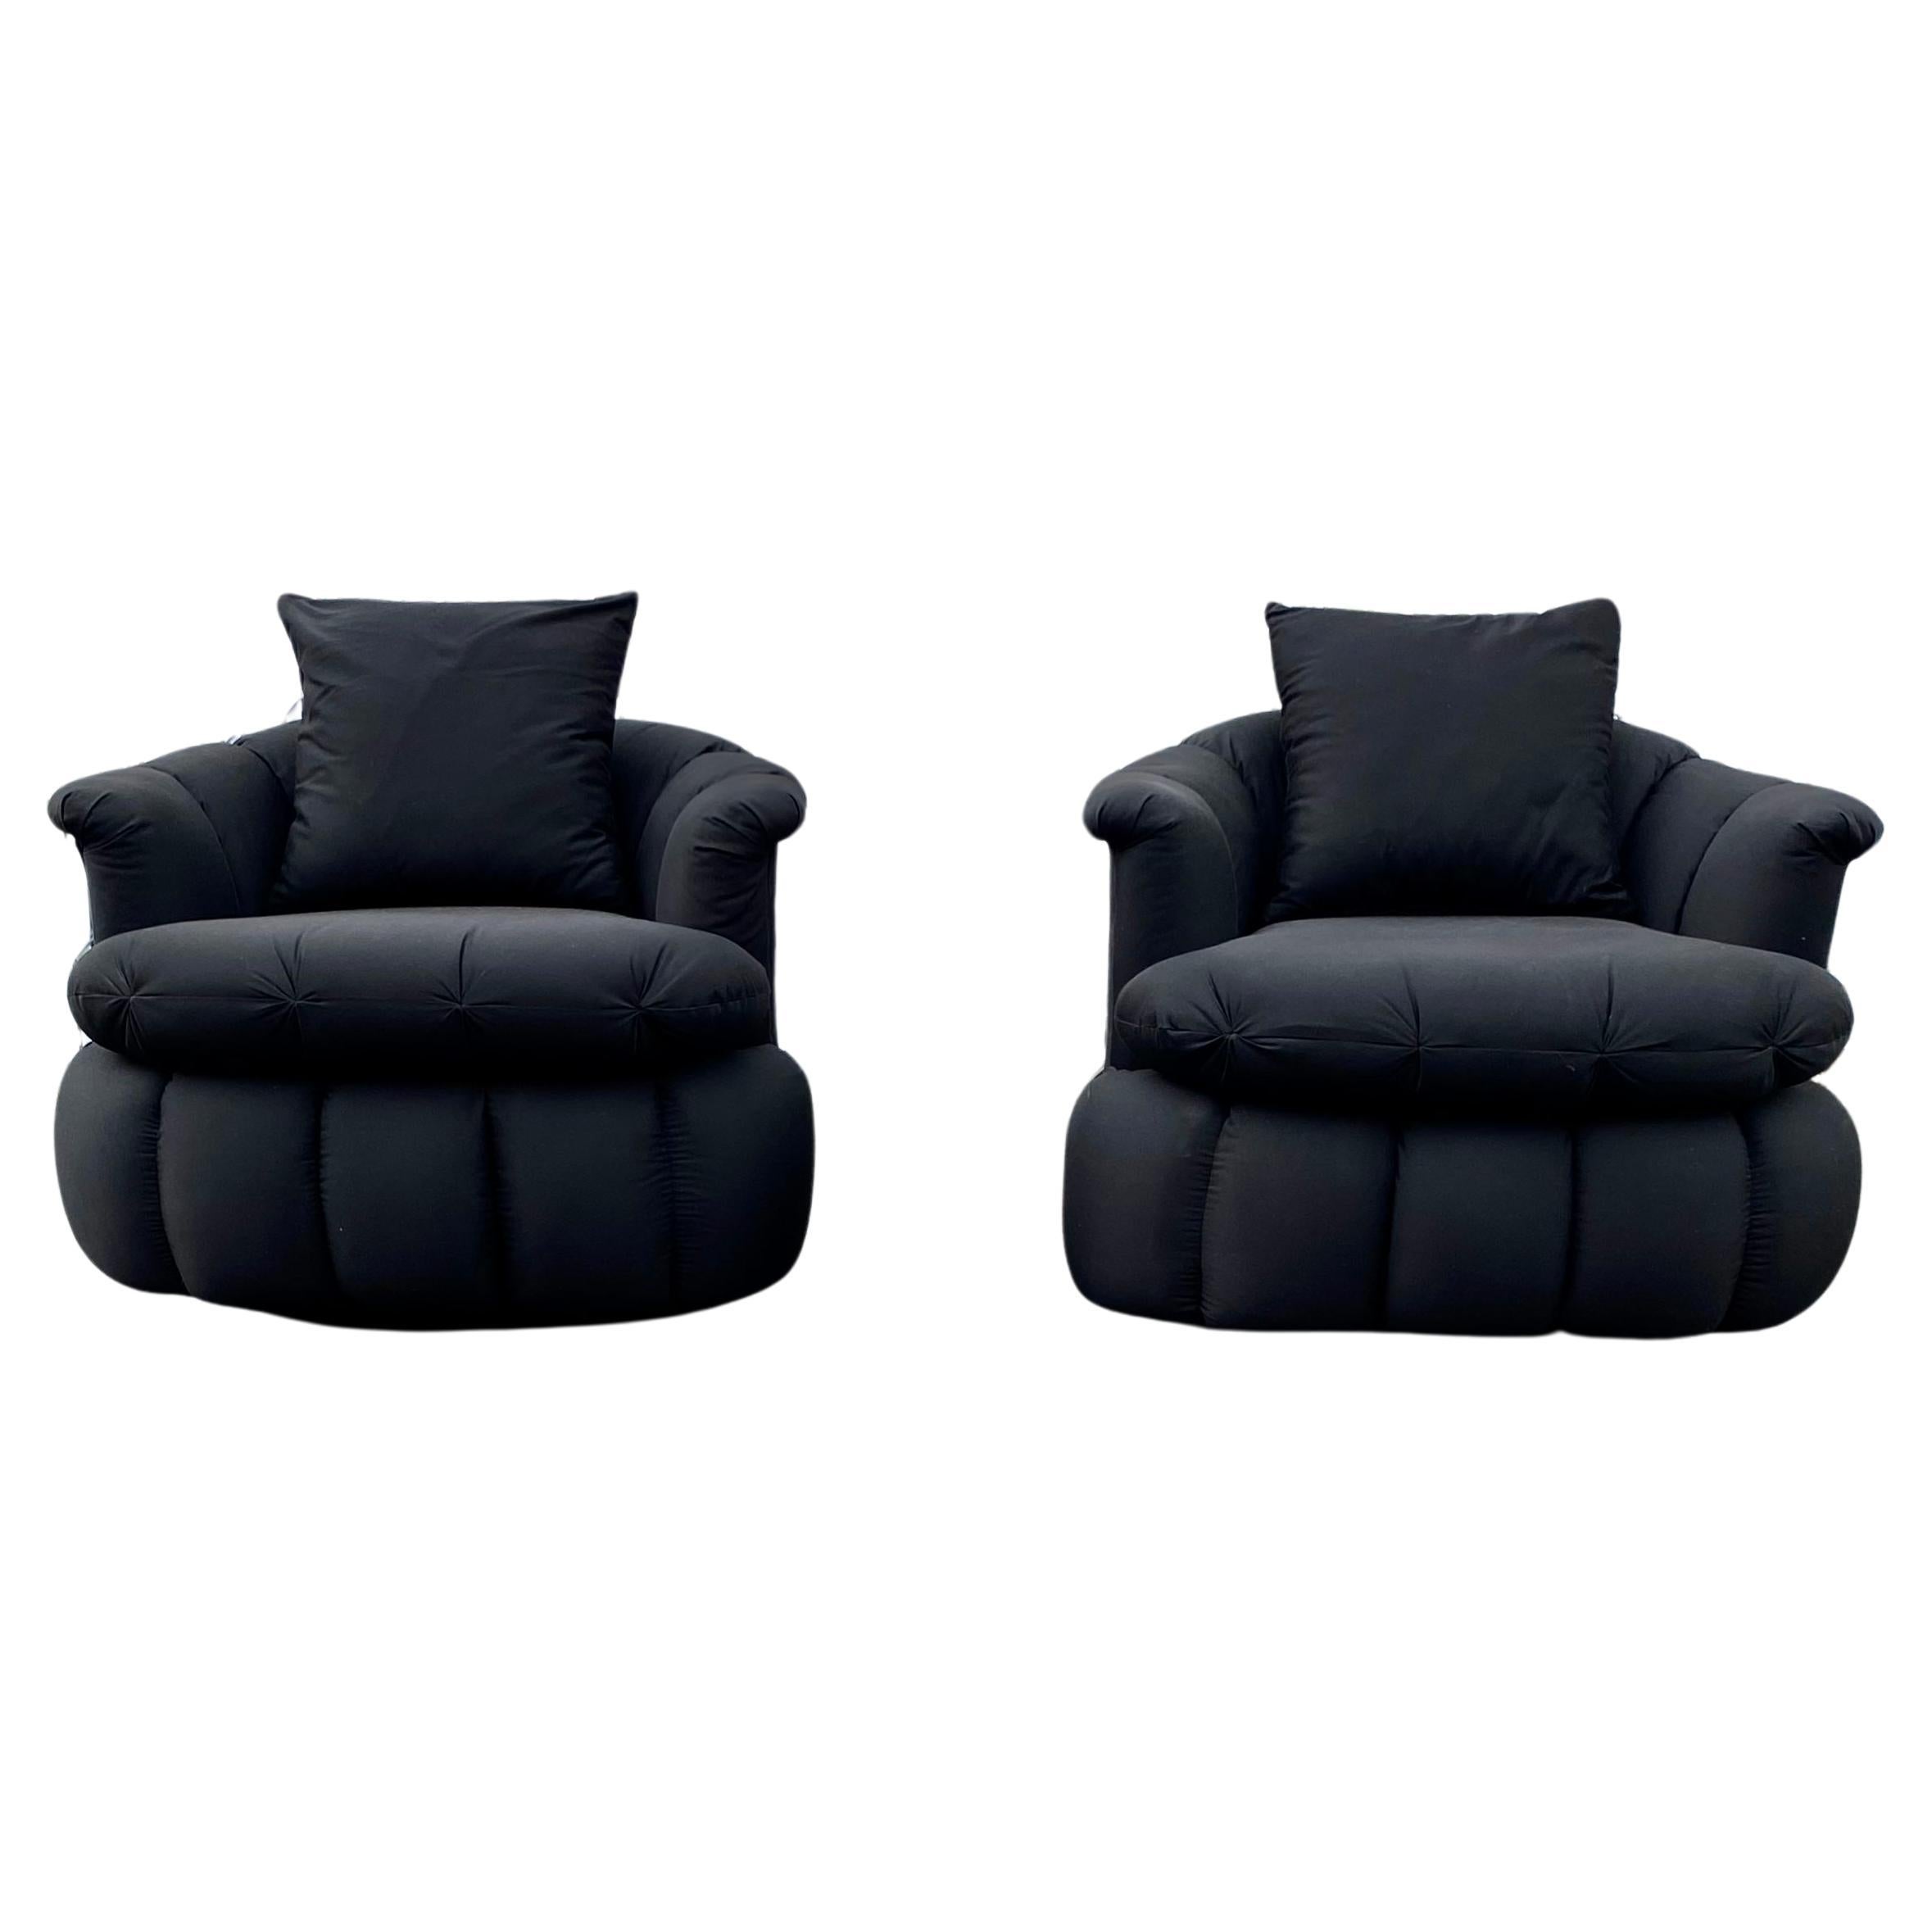 1980 Croissant Tufted Channeled Swivel Chairs, Set of 2 en vente